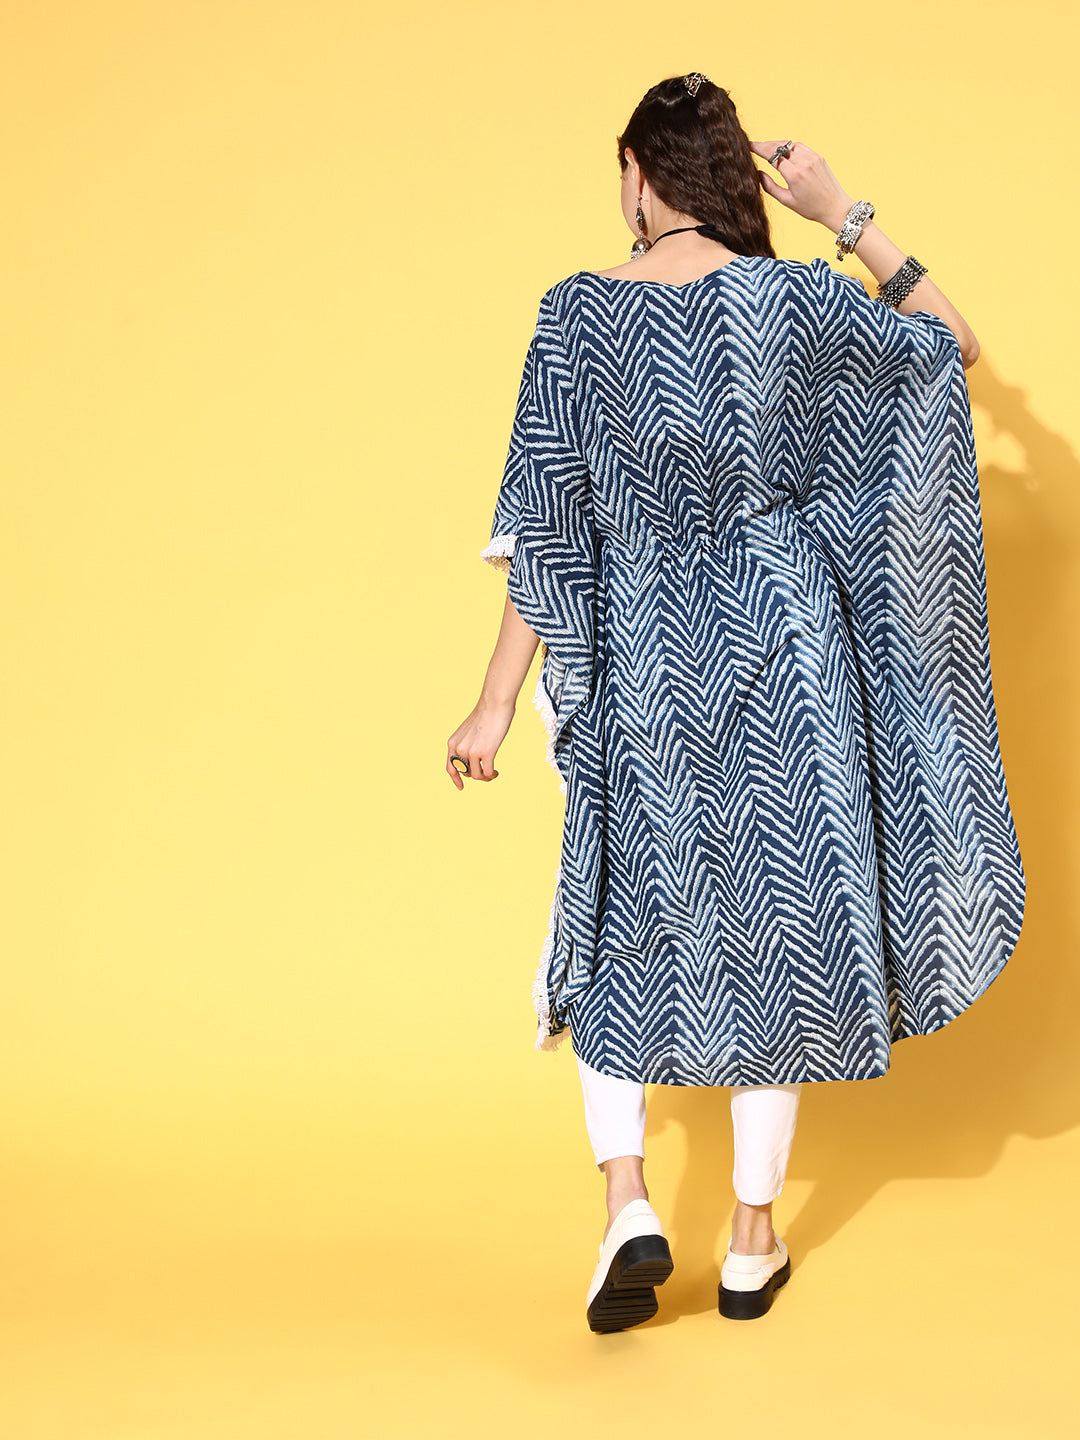 A Blue Color Cotton Pigment Zig-Zag Printed Kaftan With With Laced Embellishments